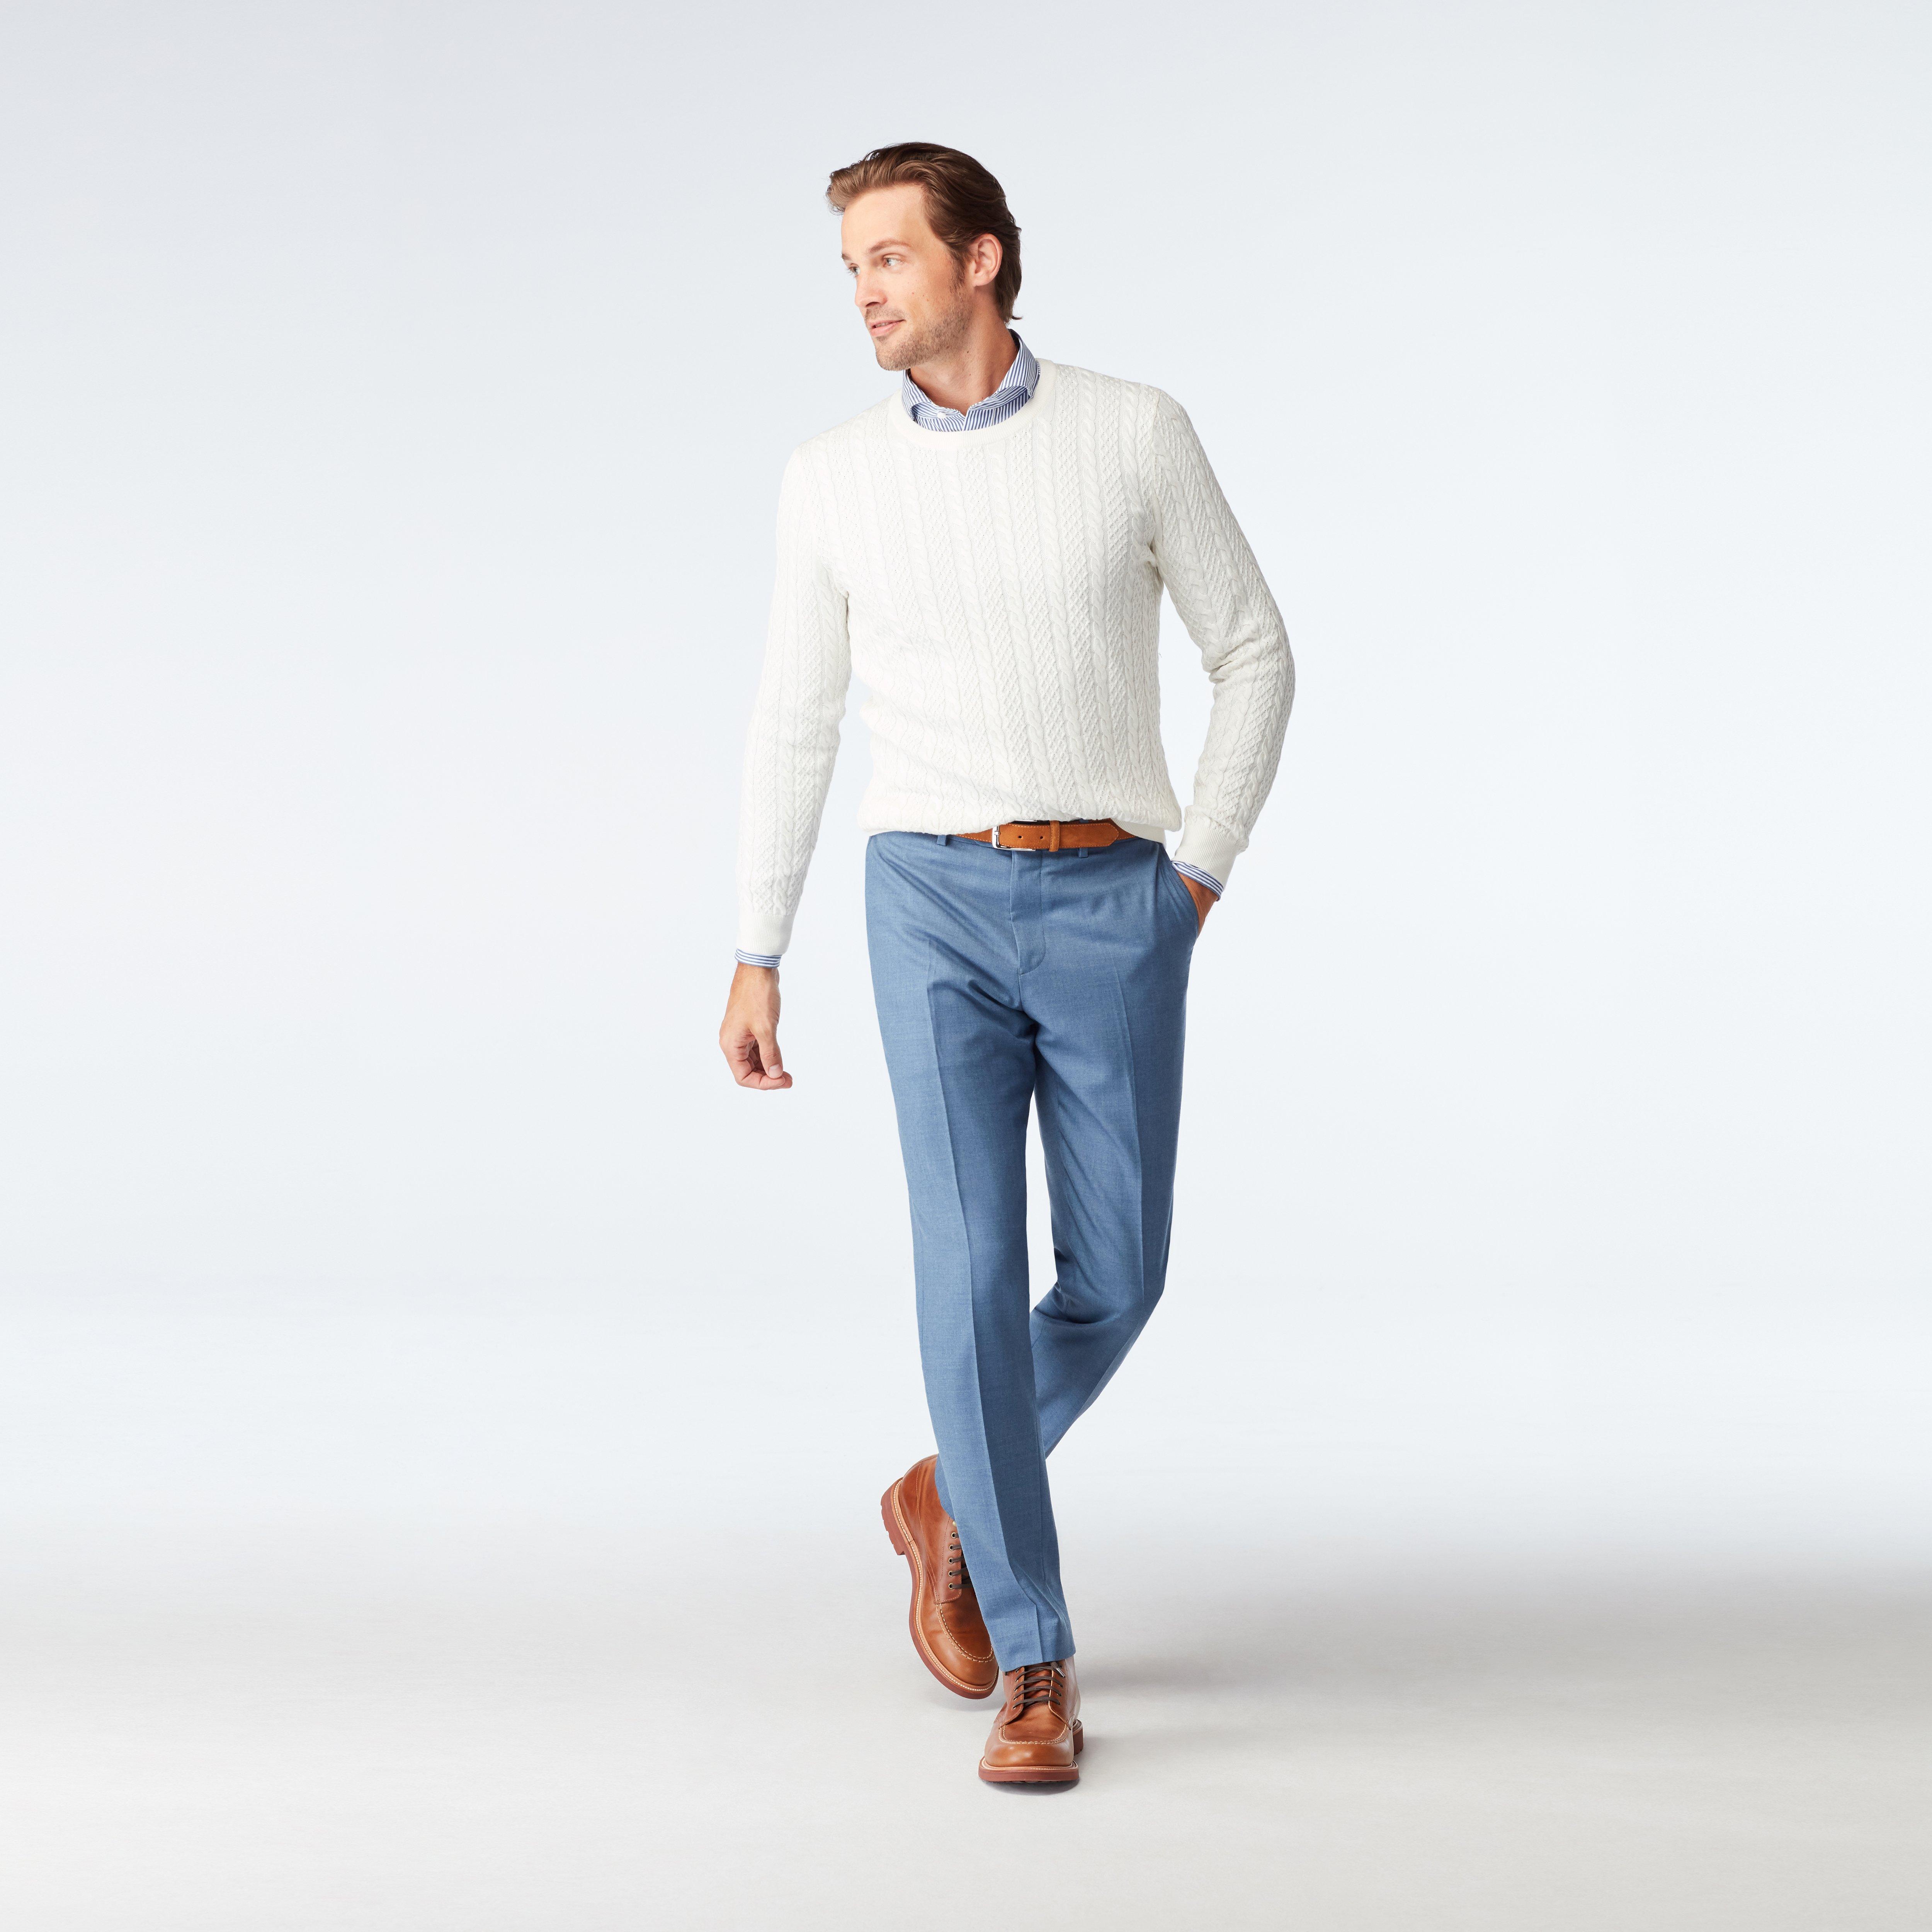 Custom Pants Made For You - Hayward Flannel Light Blue Pants | INDOCHINO